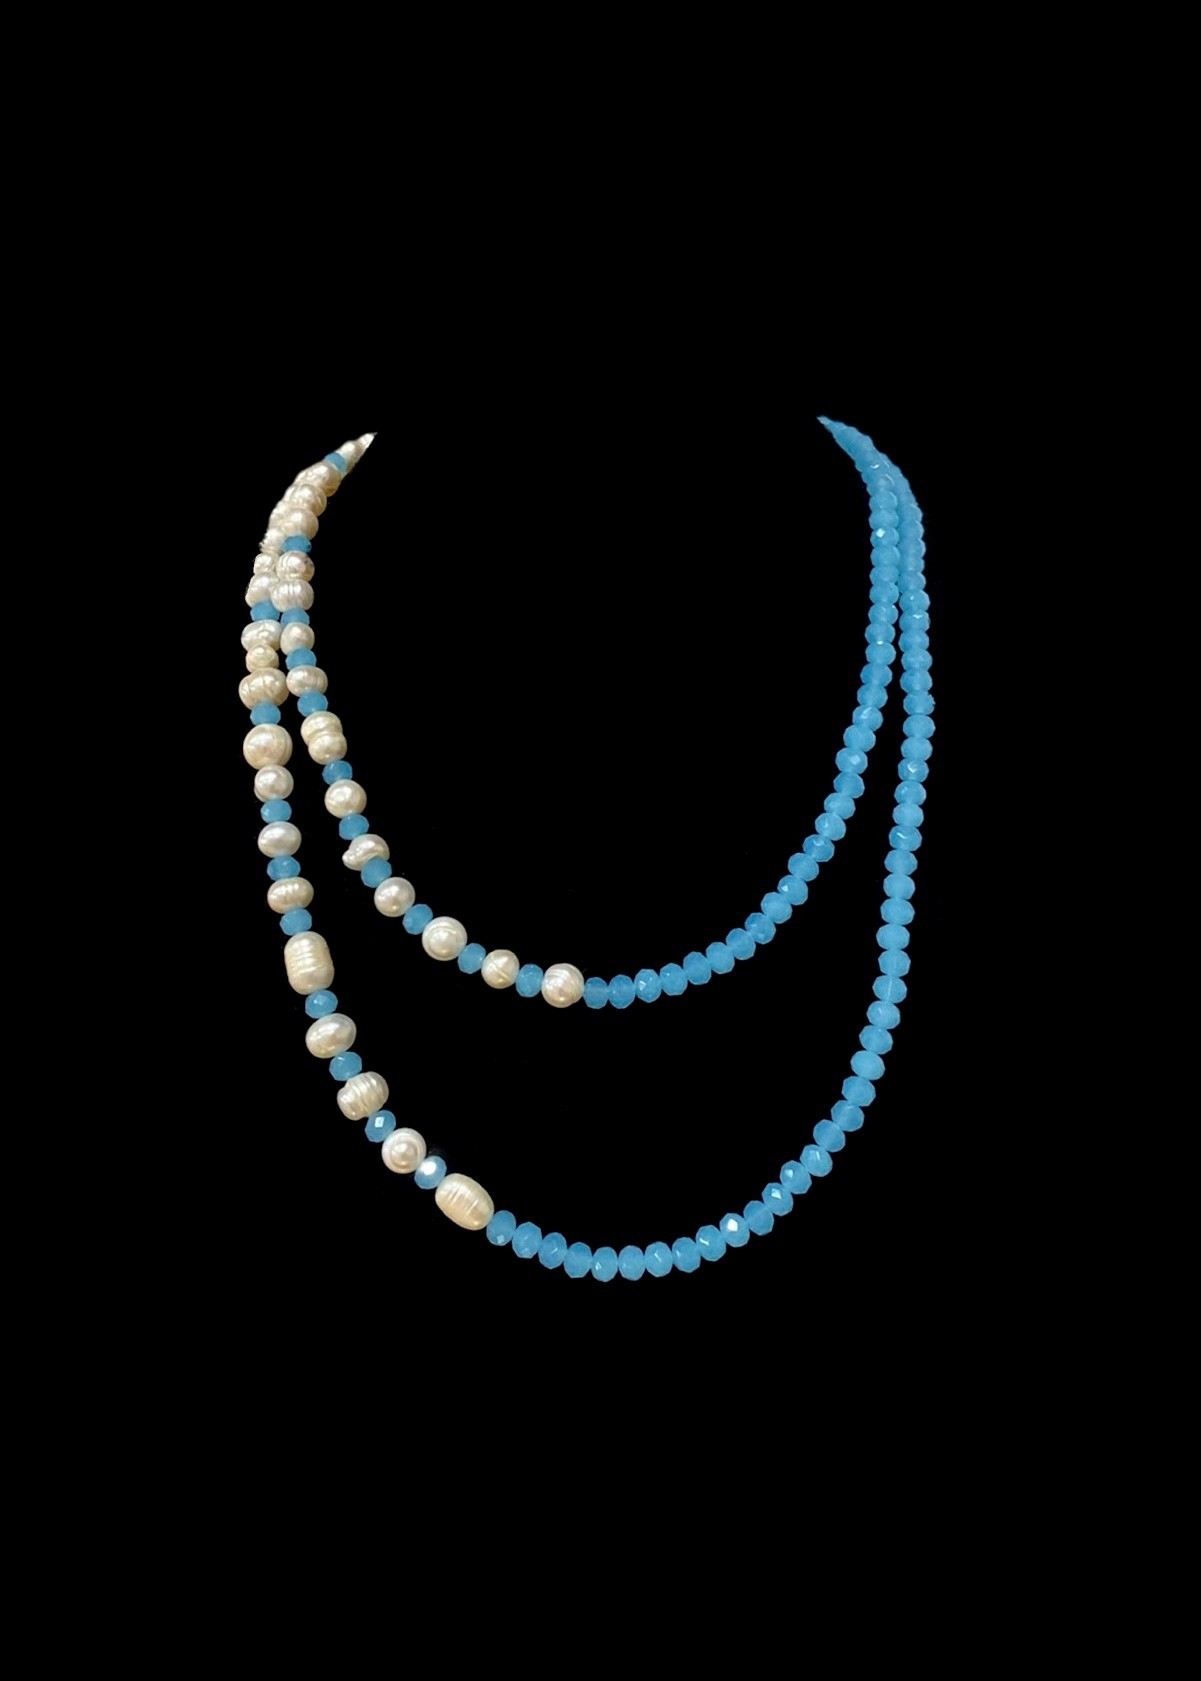 Mecca pearls necklace 